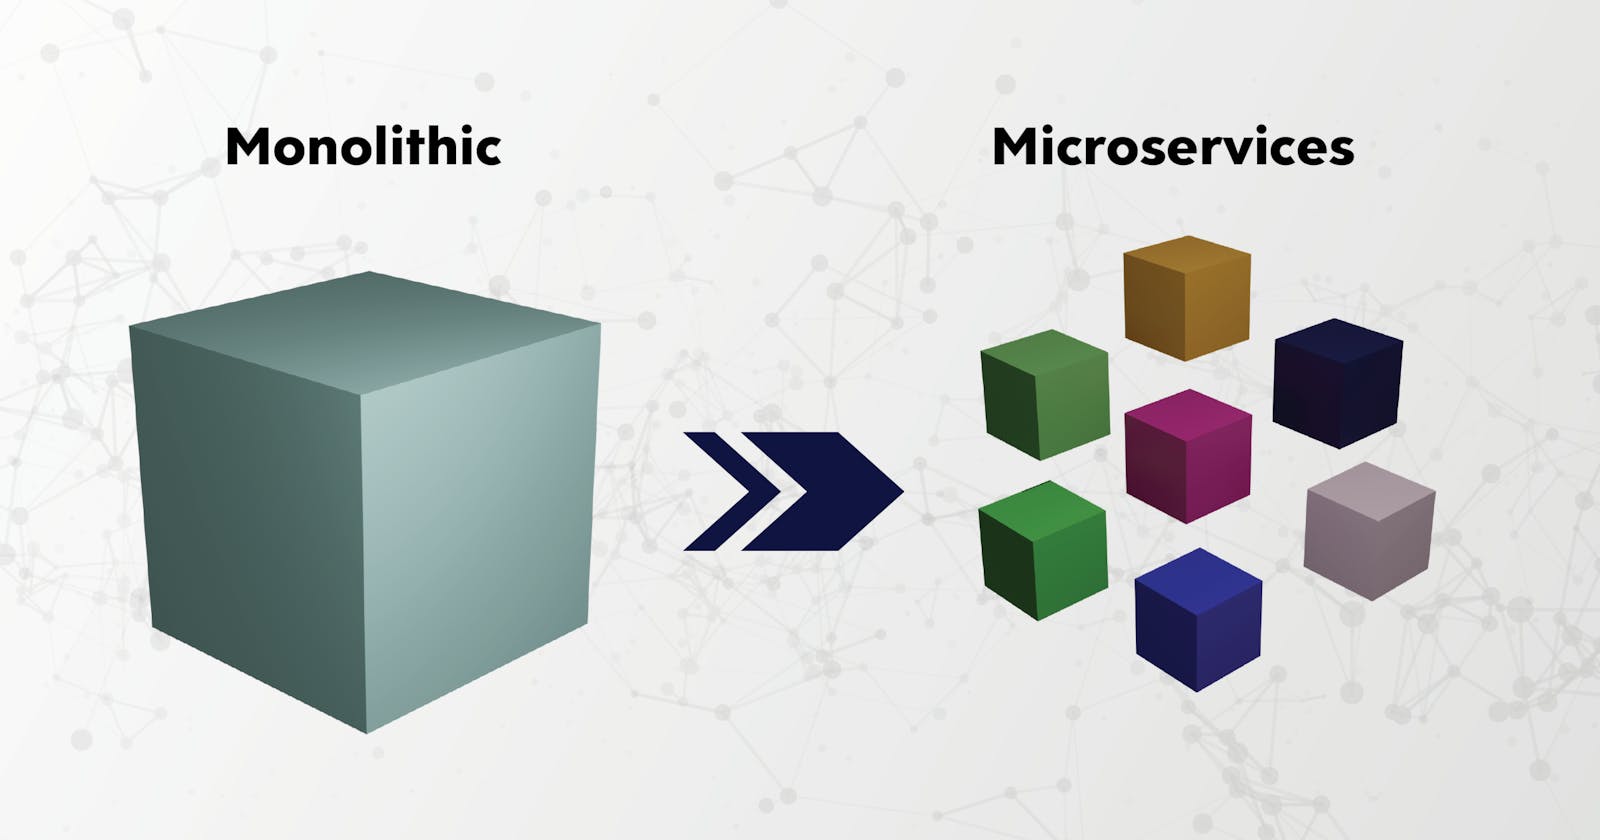 Which architecture should you use: microservices or monolithic?